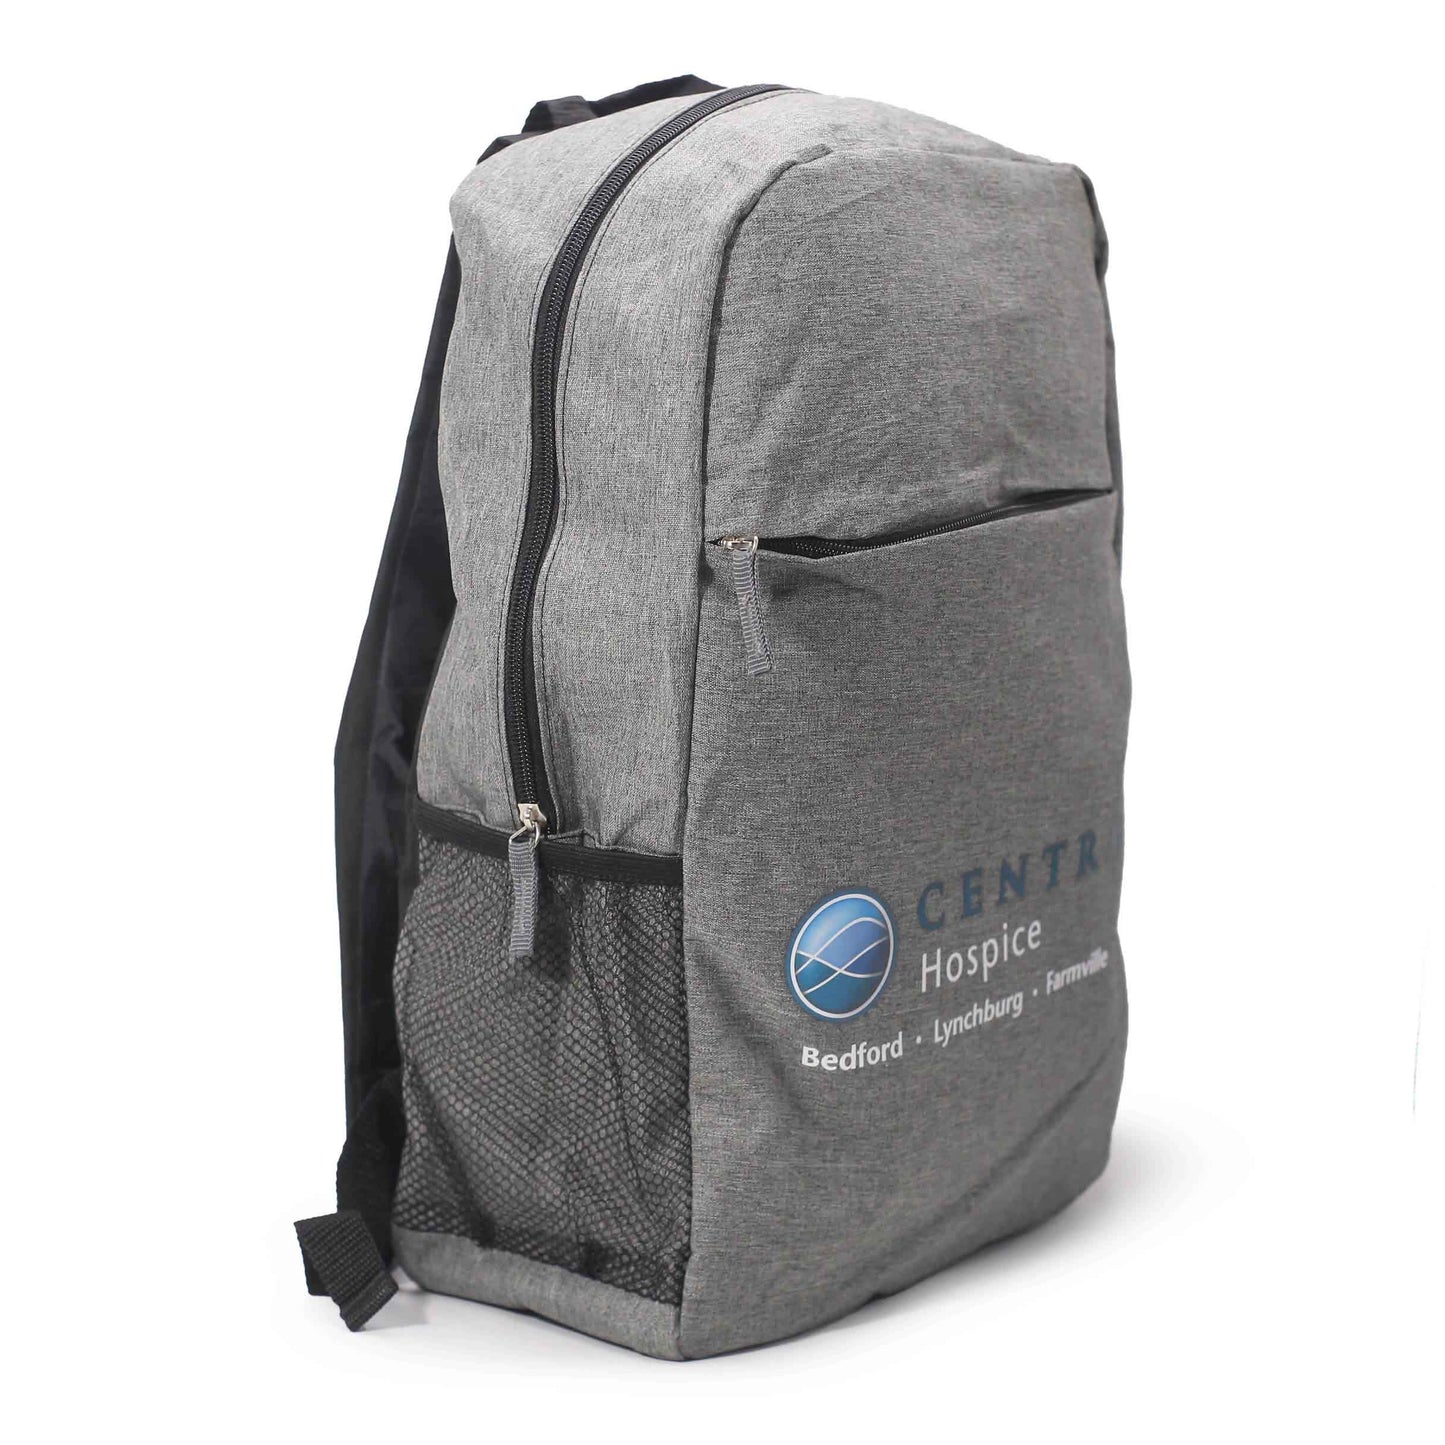 CENTRA HOSPICE BACKPACK